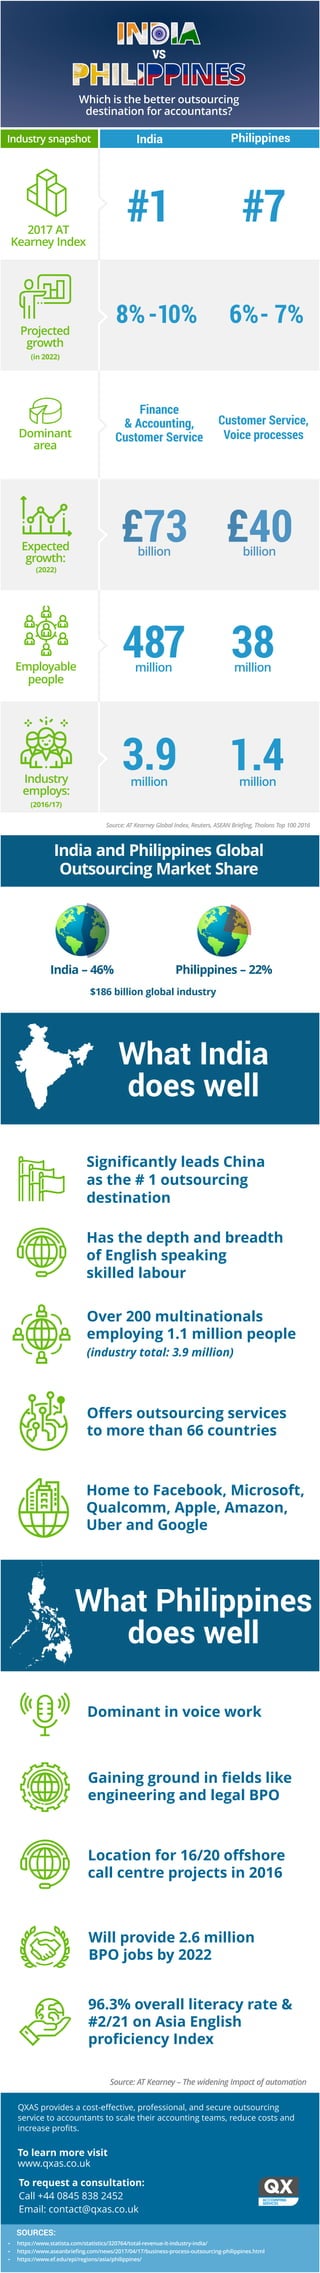 Source: AT Kearney Global Index, Reuters, ASEAN Brieﬁng, Tholons Top 100 2016
India and Philippines Global
Outsourcing Market Share
$186 billion global industry
India – 46% Philippines – 22%
What India
does well
What Philippines
does well
Signiﬁcantly leads China
as the # 1 outsourcing
destination
Has the depth and breadth
of English speaking
skilled labour
Over 200 multinationals
employing 1.1 million people
(industry total: 3.9 million)
Oﬀers outsourcing services
to more than 66 countries
Home to Facebook, Microsoft,
Qualcomm, Apple, Amazon,
Uber and Google
Dominant in voice work
Gaining ground in ﬁelds like
engineering and legal BPO
Location for 16/20 oﬀshore
call centre projects in 2016
Will provide 2.6 million
BPO jobs by 2022
96.3% overall literacy rate &
#2/21 on Asia English
proﬁciency Index
Source: AT Kearney – The widening Impact of automation
QXAS provides a cost-eﬀective, professional, and secure outsourcing
service to accountants to scale their accounting teams, reduce costs and
increase proﬁts.
SOURCES:
Ÿ https://www.ef.edu/epi/regions/asia/philippines/
Ÿ https://www.statista.com/statistics/320764/total-revenue-it-industry-india/
Ÿ https://www.aseanbrieﬁng.com/news/2017/04/17/business-process-outsourcing-philippines.html
To learn more visit
www.qxas.co.uk
To request a consultation:
Call +44 0845 838 2452
Email: contact@qxas.co.uk
Which is the better outsourcing
destination for accountants?
India Philippines
vs
(in 2022)
Projected
growth
2017 AT
Kearney Index
Dominant
area
8%-10% 6%- 7%
Finance
& Accounting,
Customer Service
Customer Service,
Voice processes
#1 #7
Employable
people
487 38million million
Expected
growth:
(2022)
£73billion
£40billion
Industry
employs:
3.9 1.4million million
(2016/17)
Industry snapshot
 